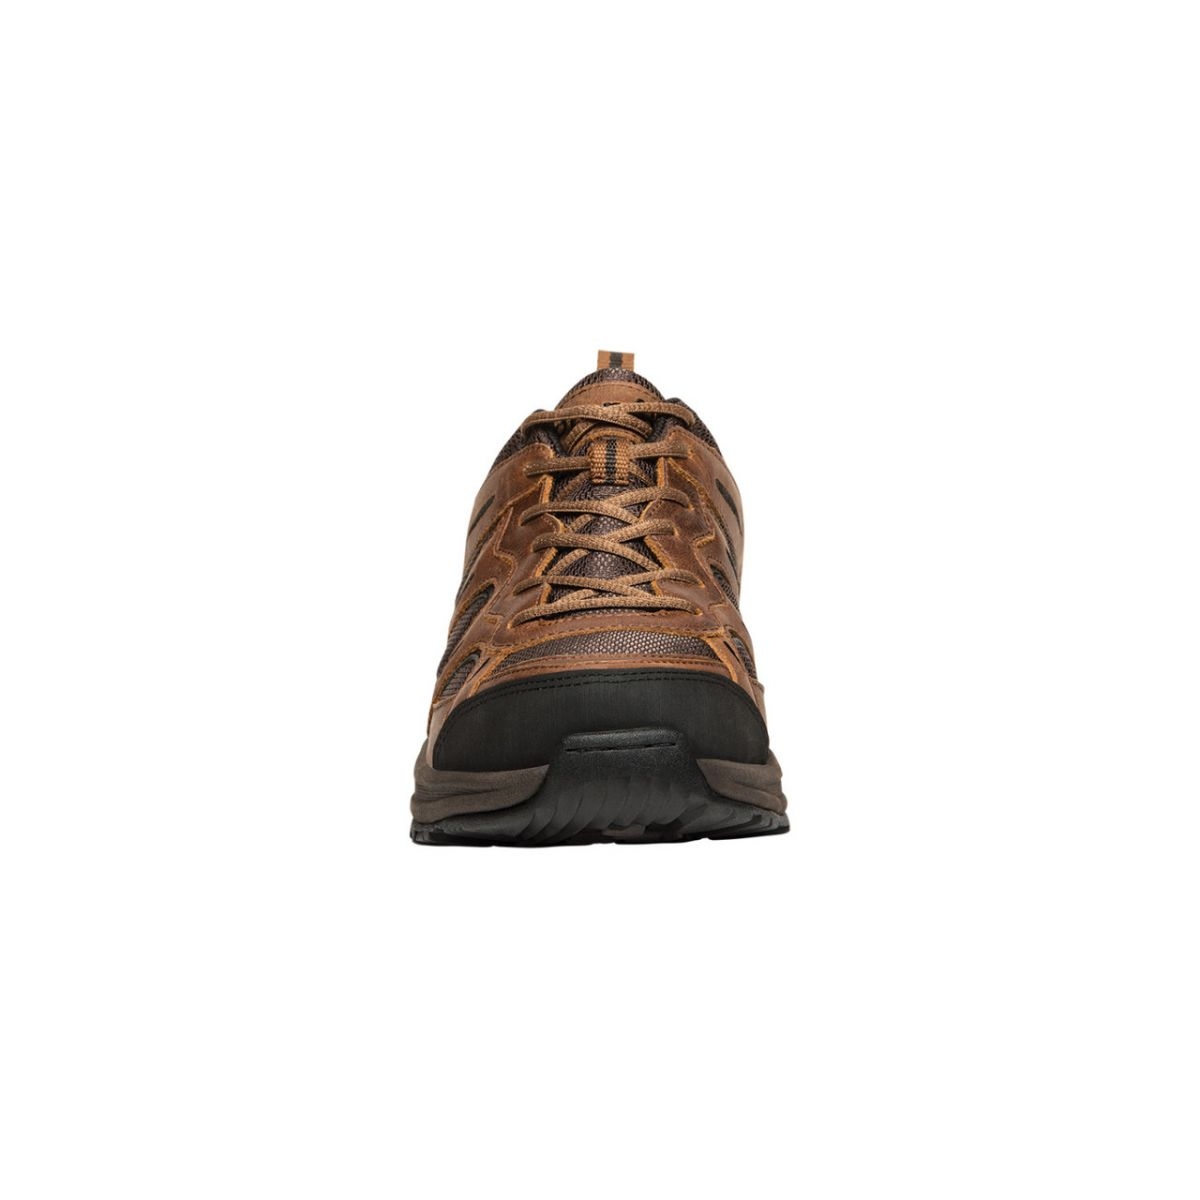 Propet Men's Connelly Hiking Shoe Brown - M5503BR BROWN - BROWN, 13-3E